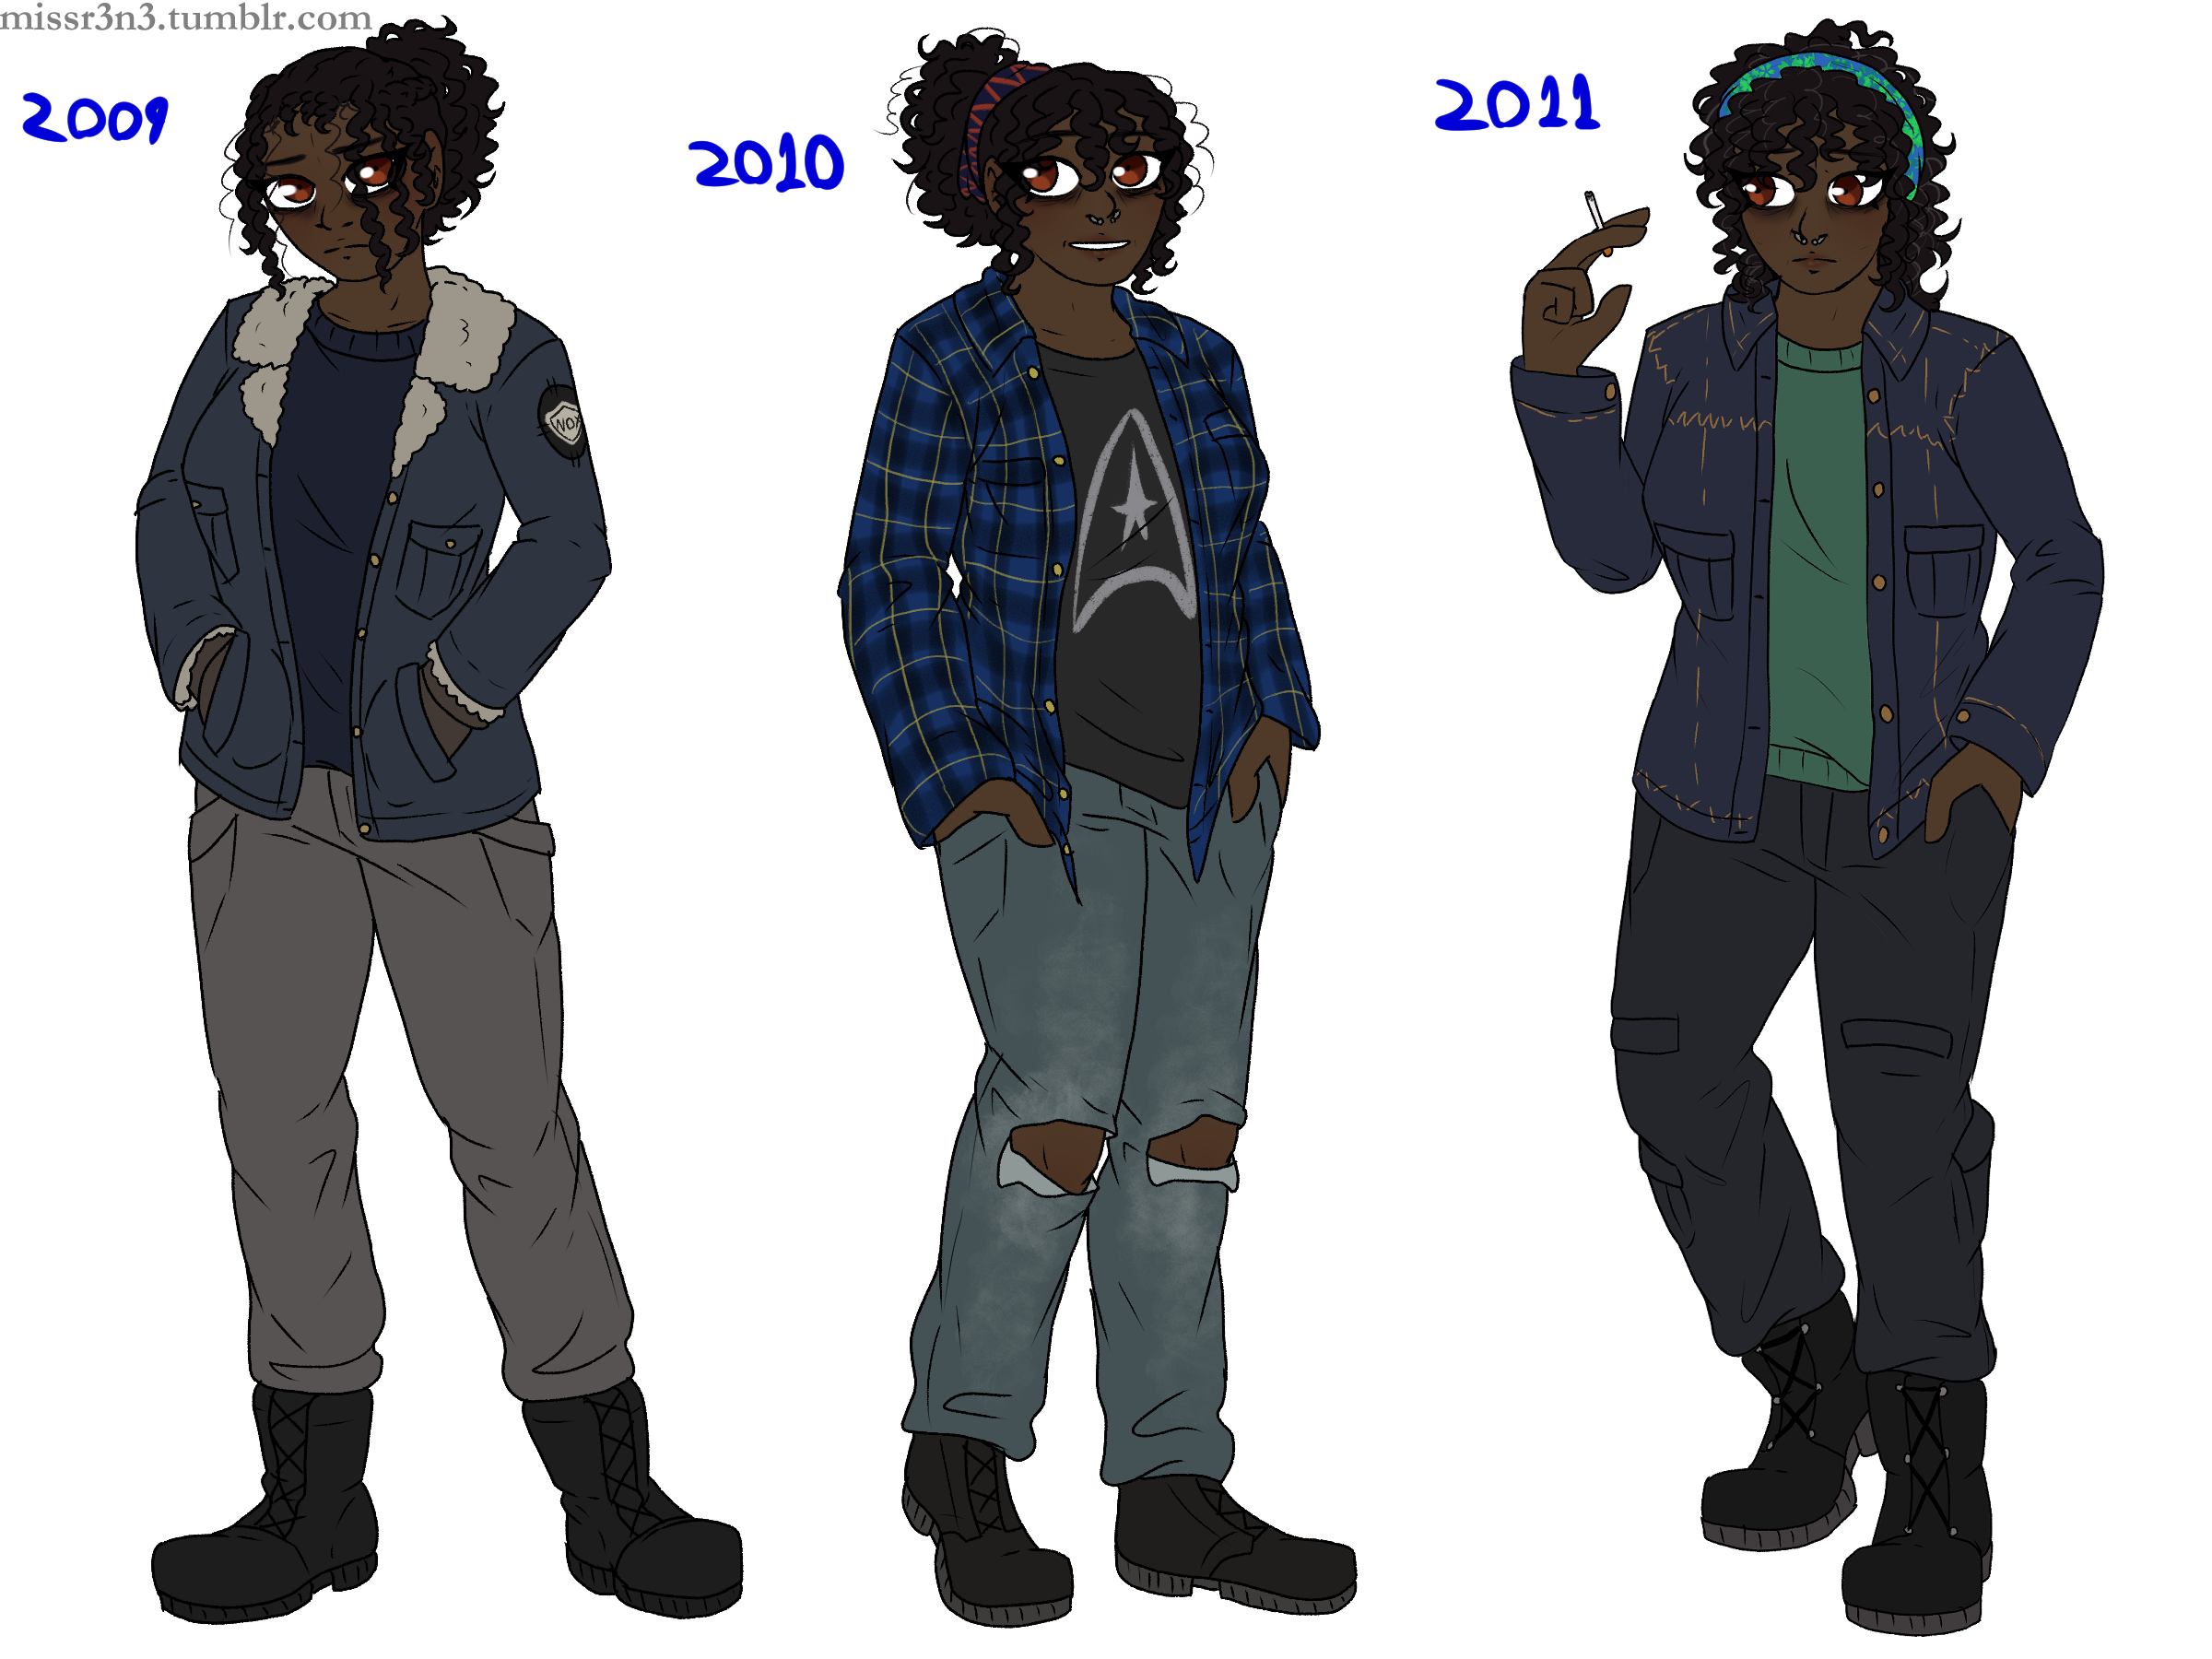 jessie simmons' 2009, 2010, and 2011 designs